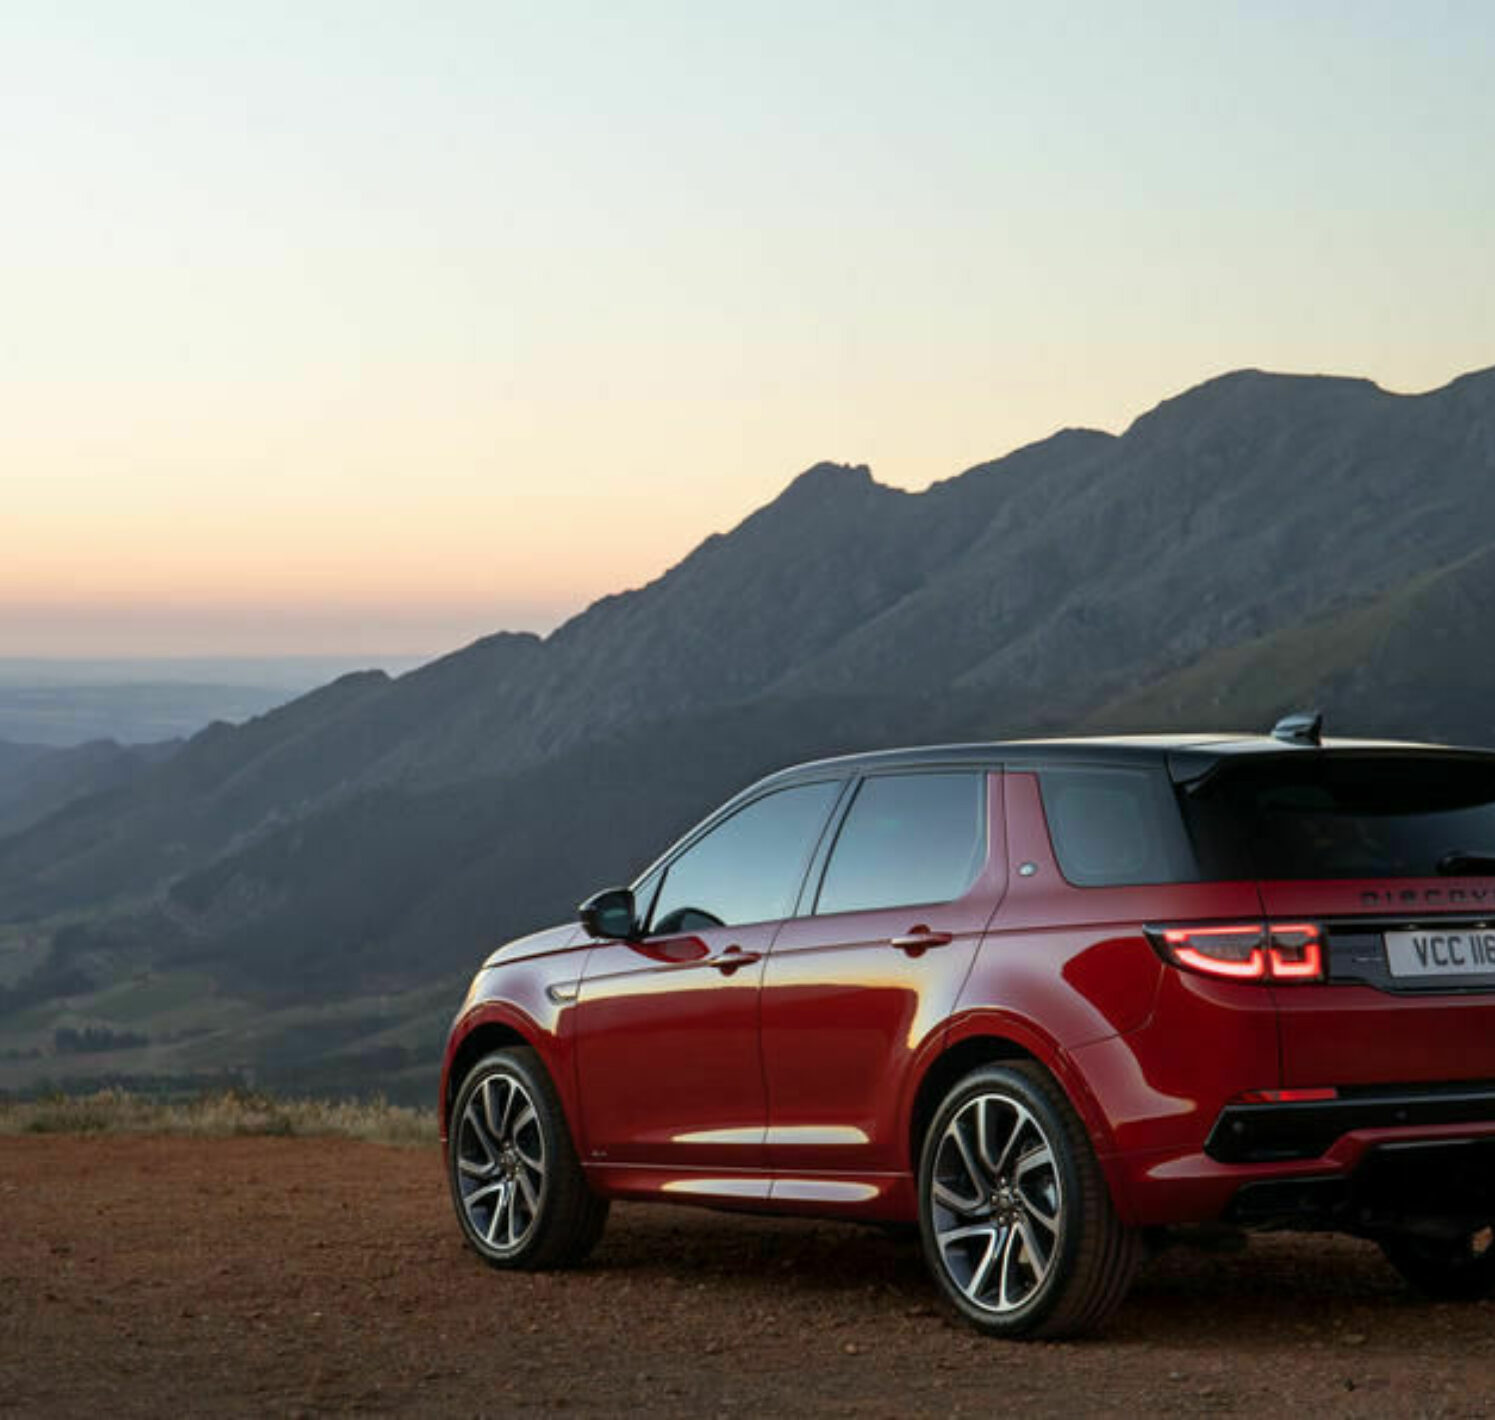 https://autofilter.sk/assets/images/discovery-sport/gallery/78-land-rover-discovery-sport-2019-official-pics-static-rear_01-galeria.jpg - obrazok